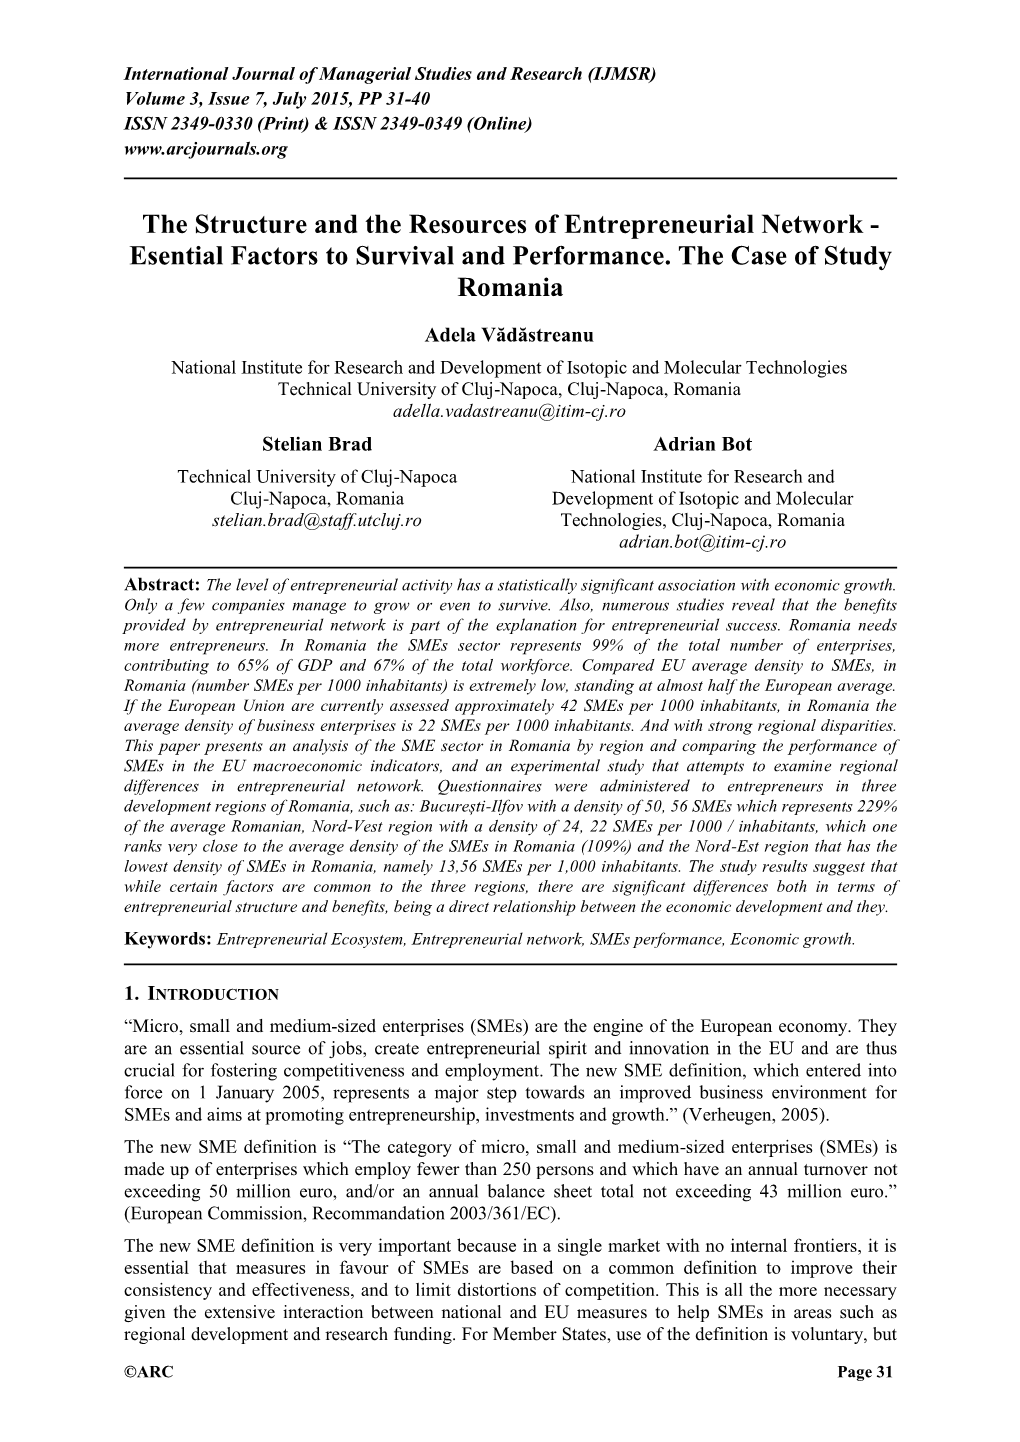 The Structure and the Resources of Entrepreneurial Network - Esential Factors to Survival and Performance